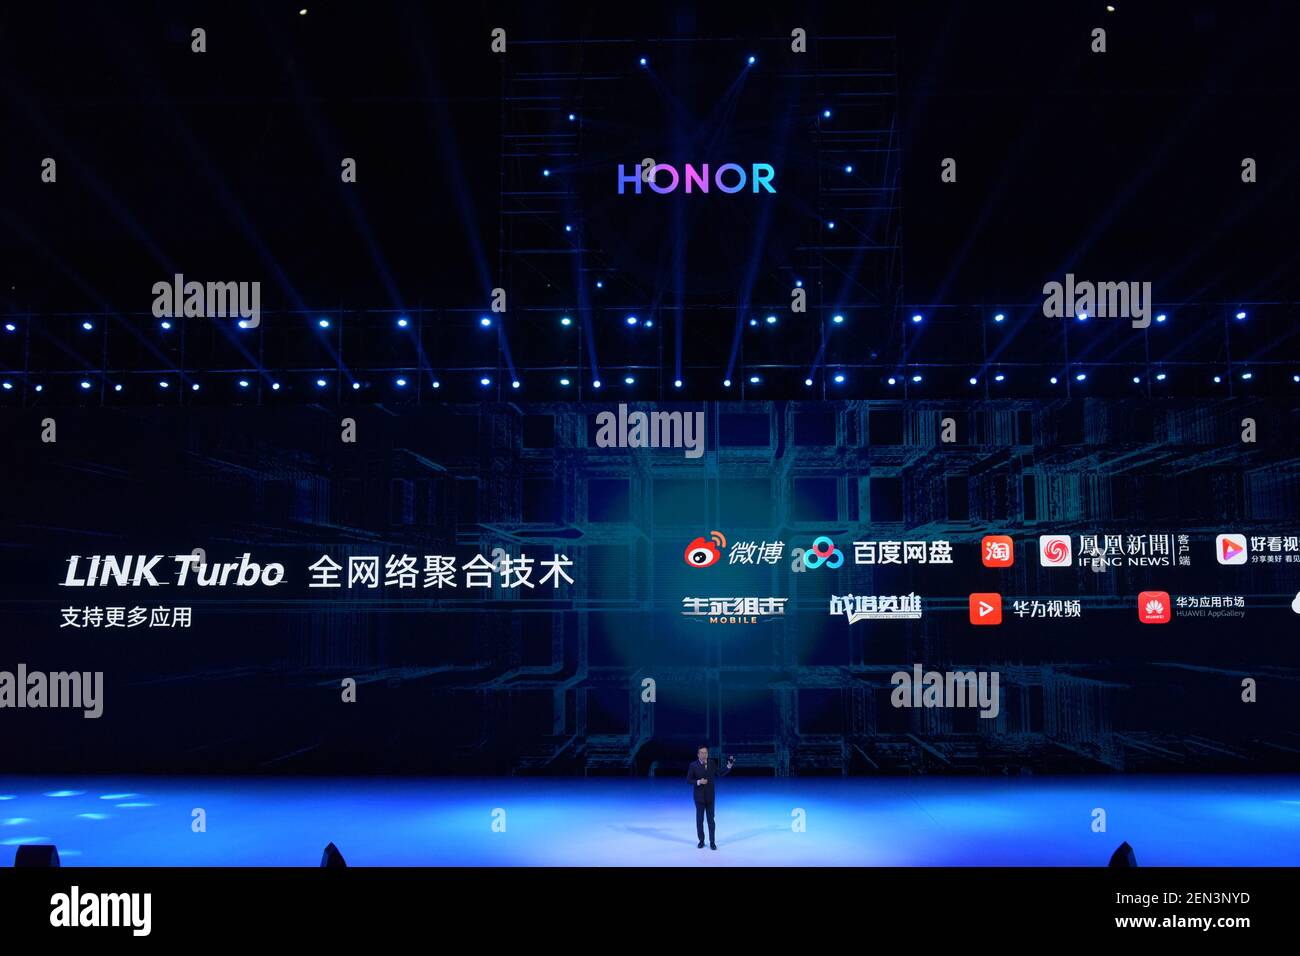 George Zhao Ming, president of Honor, the smartphone sub-brand of Huawei Technologies, introduces the Huawei Honor 20 and the Honor 20 Pro smartphones during the new product launch event in Shanghai, China, 31 May 2019. Huawei's Honor brand has unveiled its latest smartphones ¨C the Honor 20 and the Honor 20 Pro in its home market, China. The flagship models were first launched last week at an event in London. The launch event gave us the opportunity to get an in-depth knowledge of the specifications and features of both smartphones. The Honor 20 models both have a punch hole display like that Stock Photo